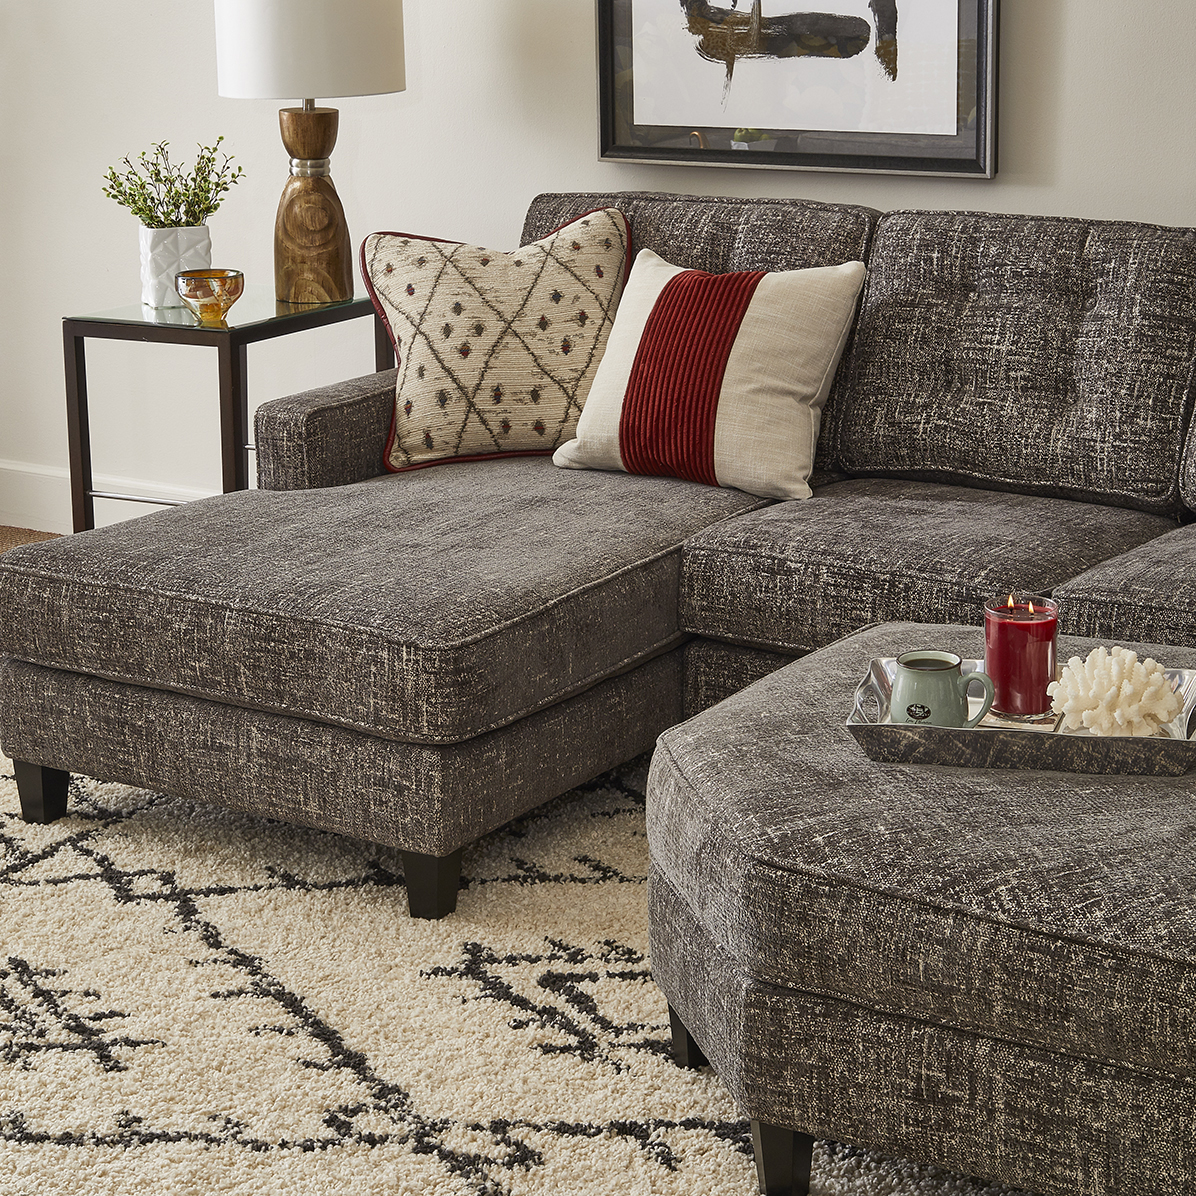 sectional with ottoman and a brown cross-stitch pattern